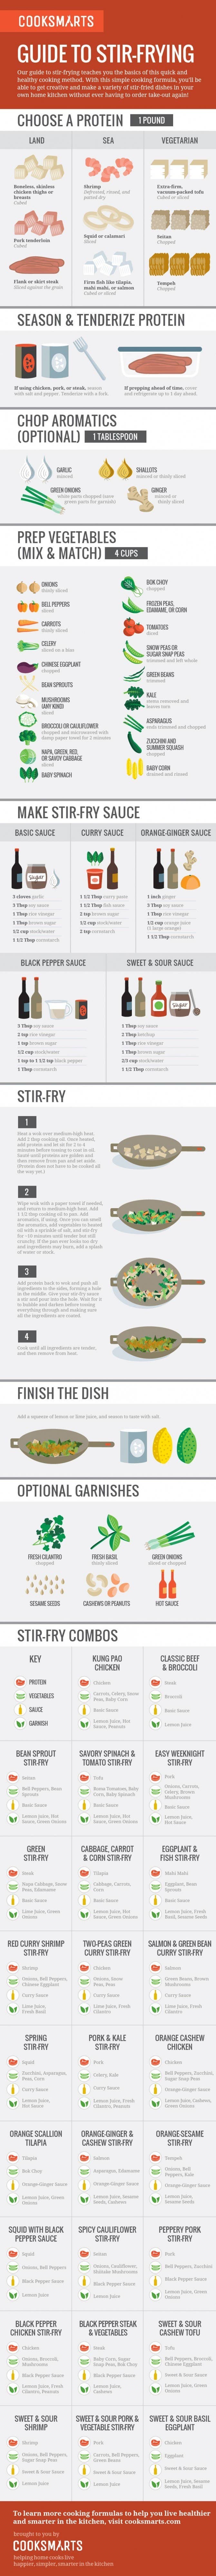 Just follow the step-by-step instructions for a nutrition-packed dinner you make in a wok (or pan).